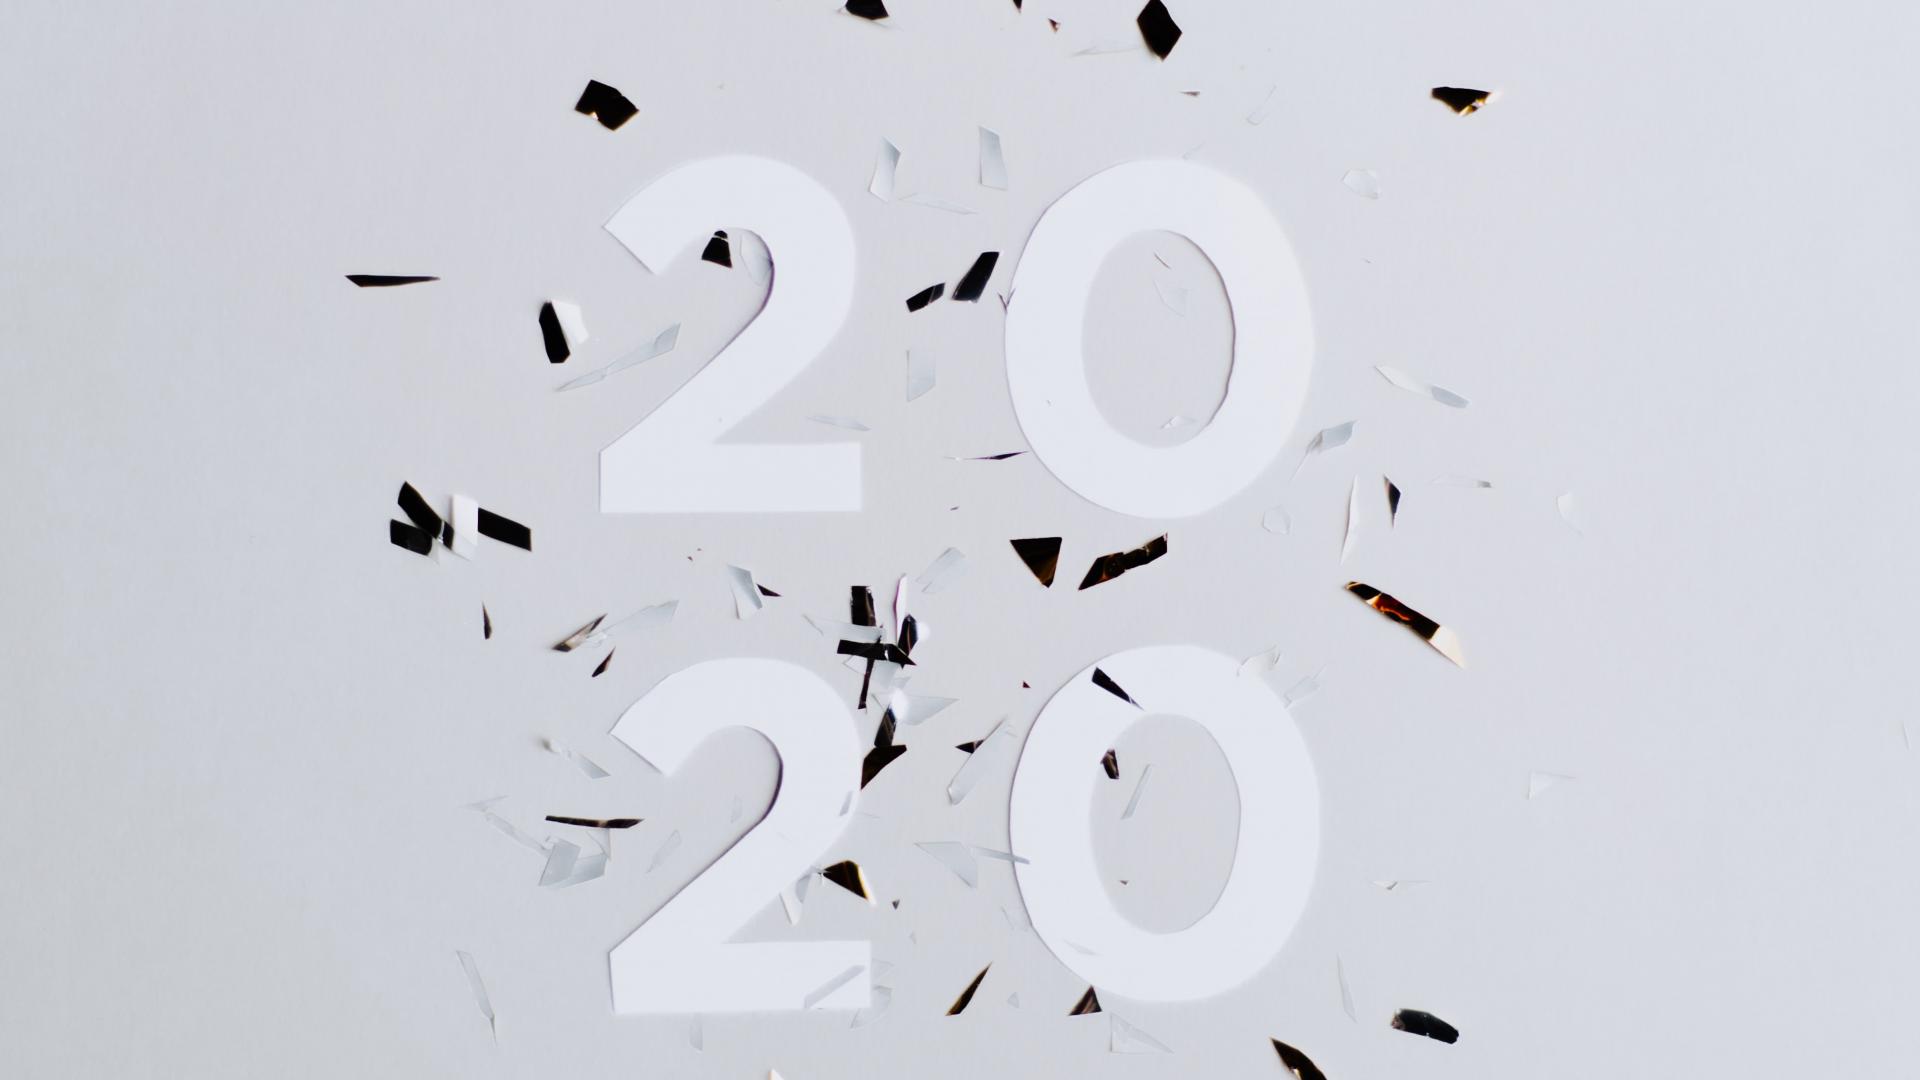 2020 cut-out text with confetti